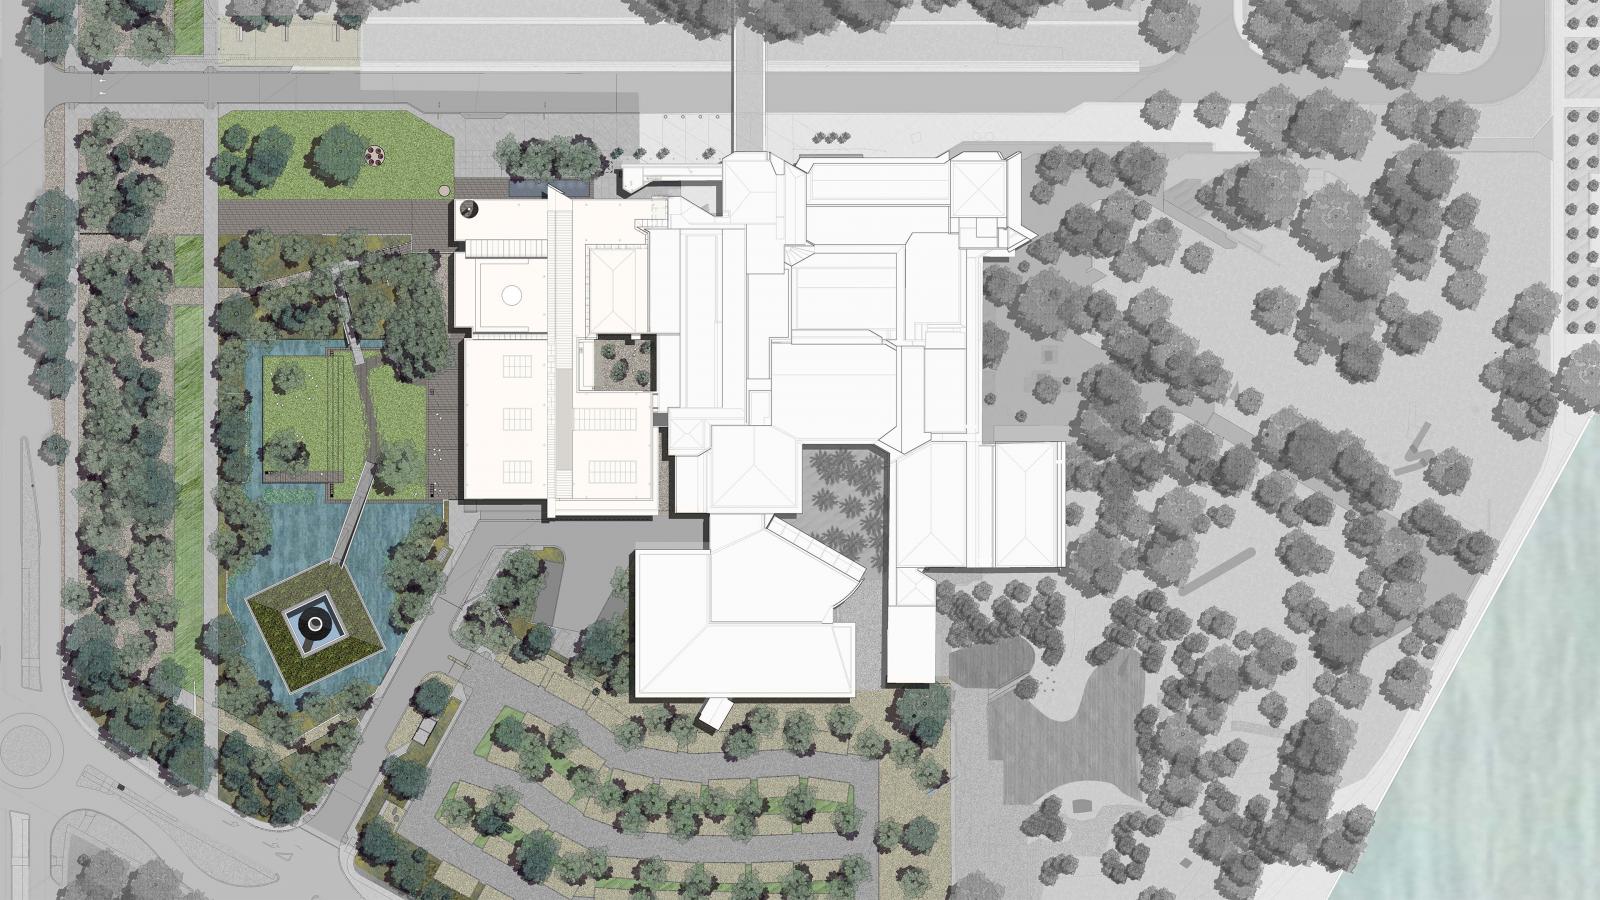 A detailed, top-down architectural plan of a large building complex with various sections and courtyards. The surrounding area includes Australian gardens, pathways, trees, and a pond with a central fountain on the left side. The bottom right corner shows a water body near the NGA section.